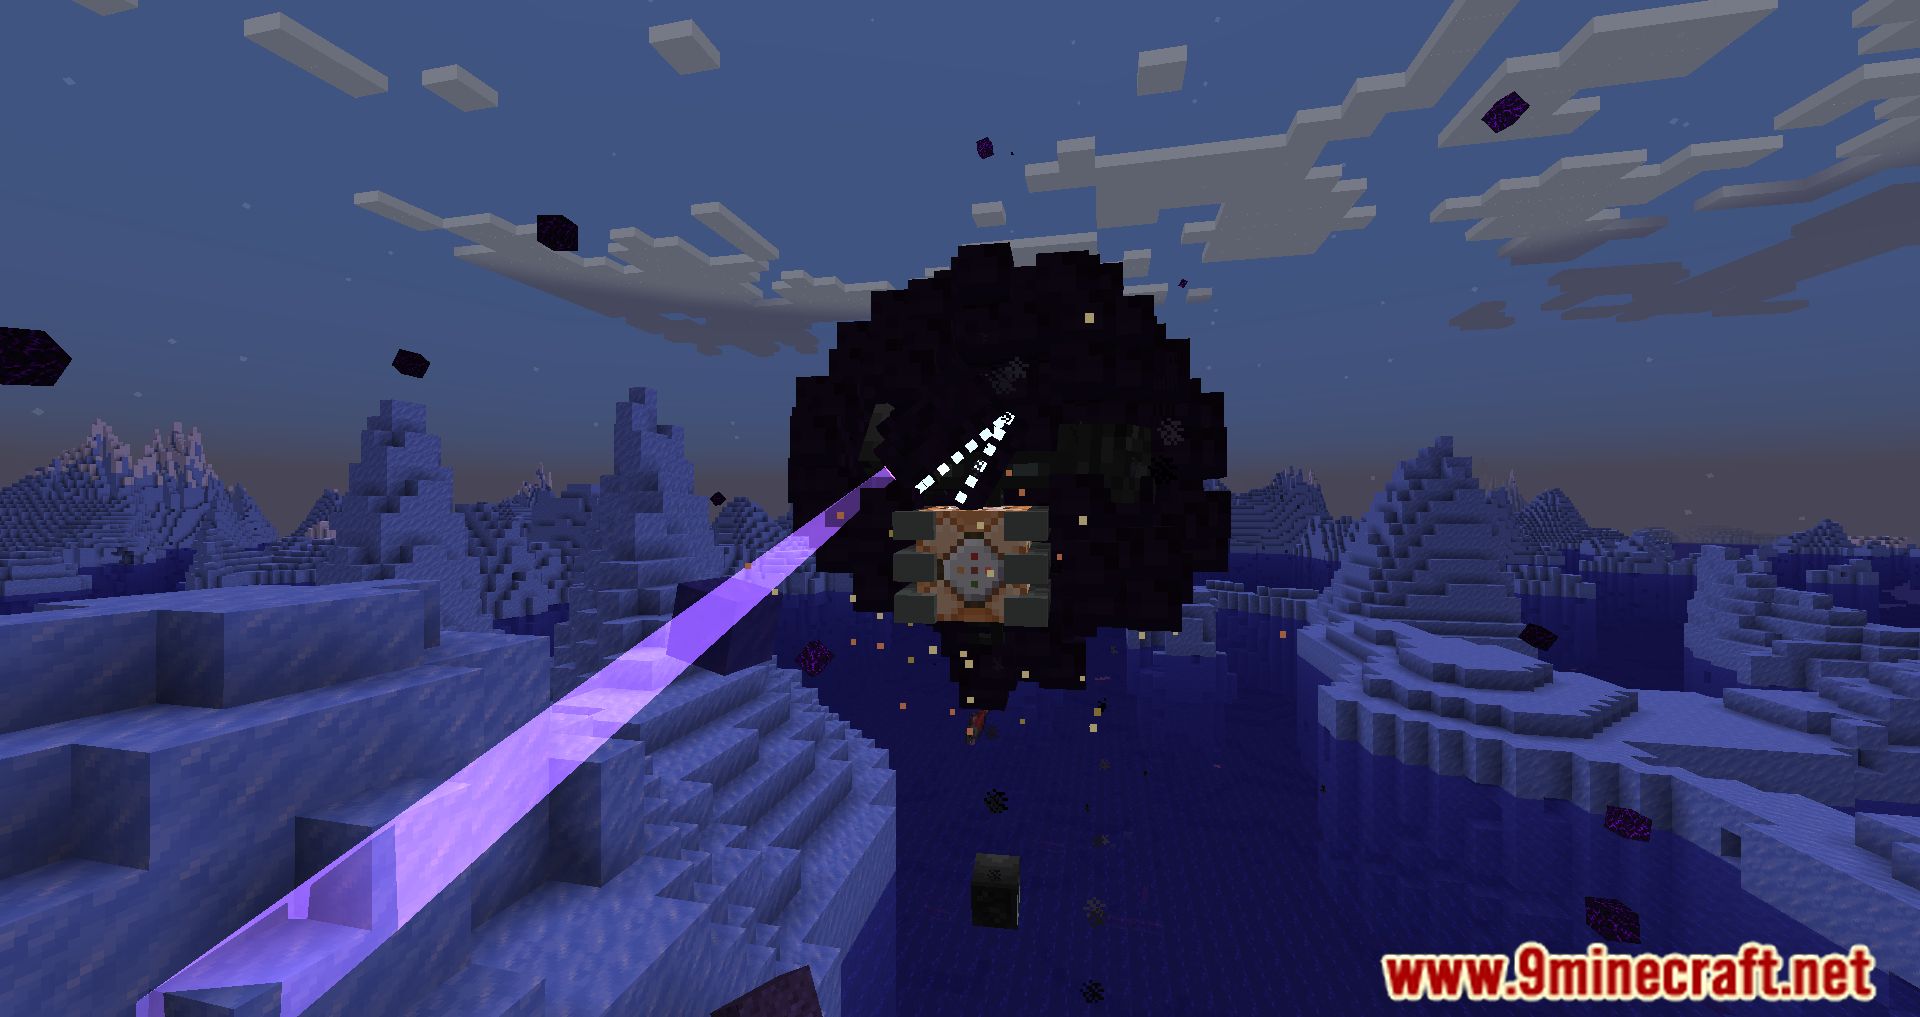 The Wither Storm. [Version 1.7] - TurboWarp